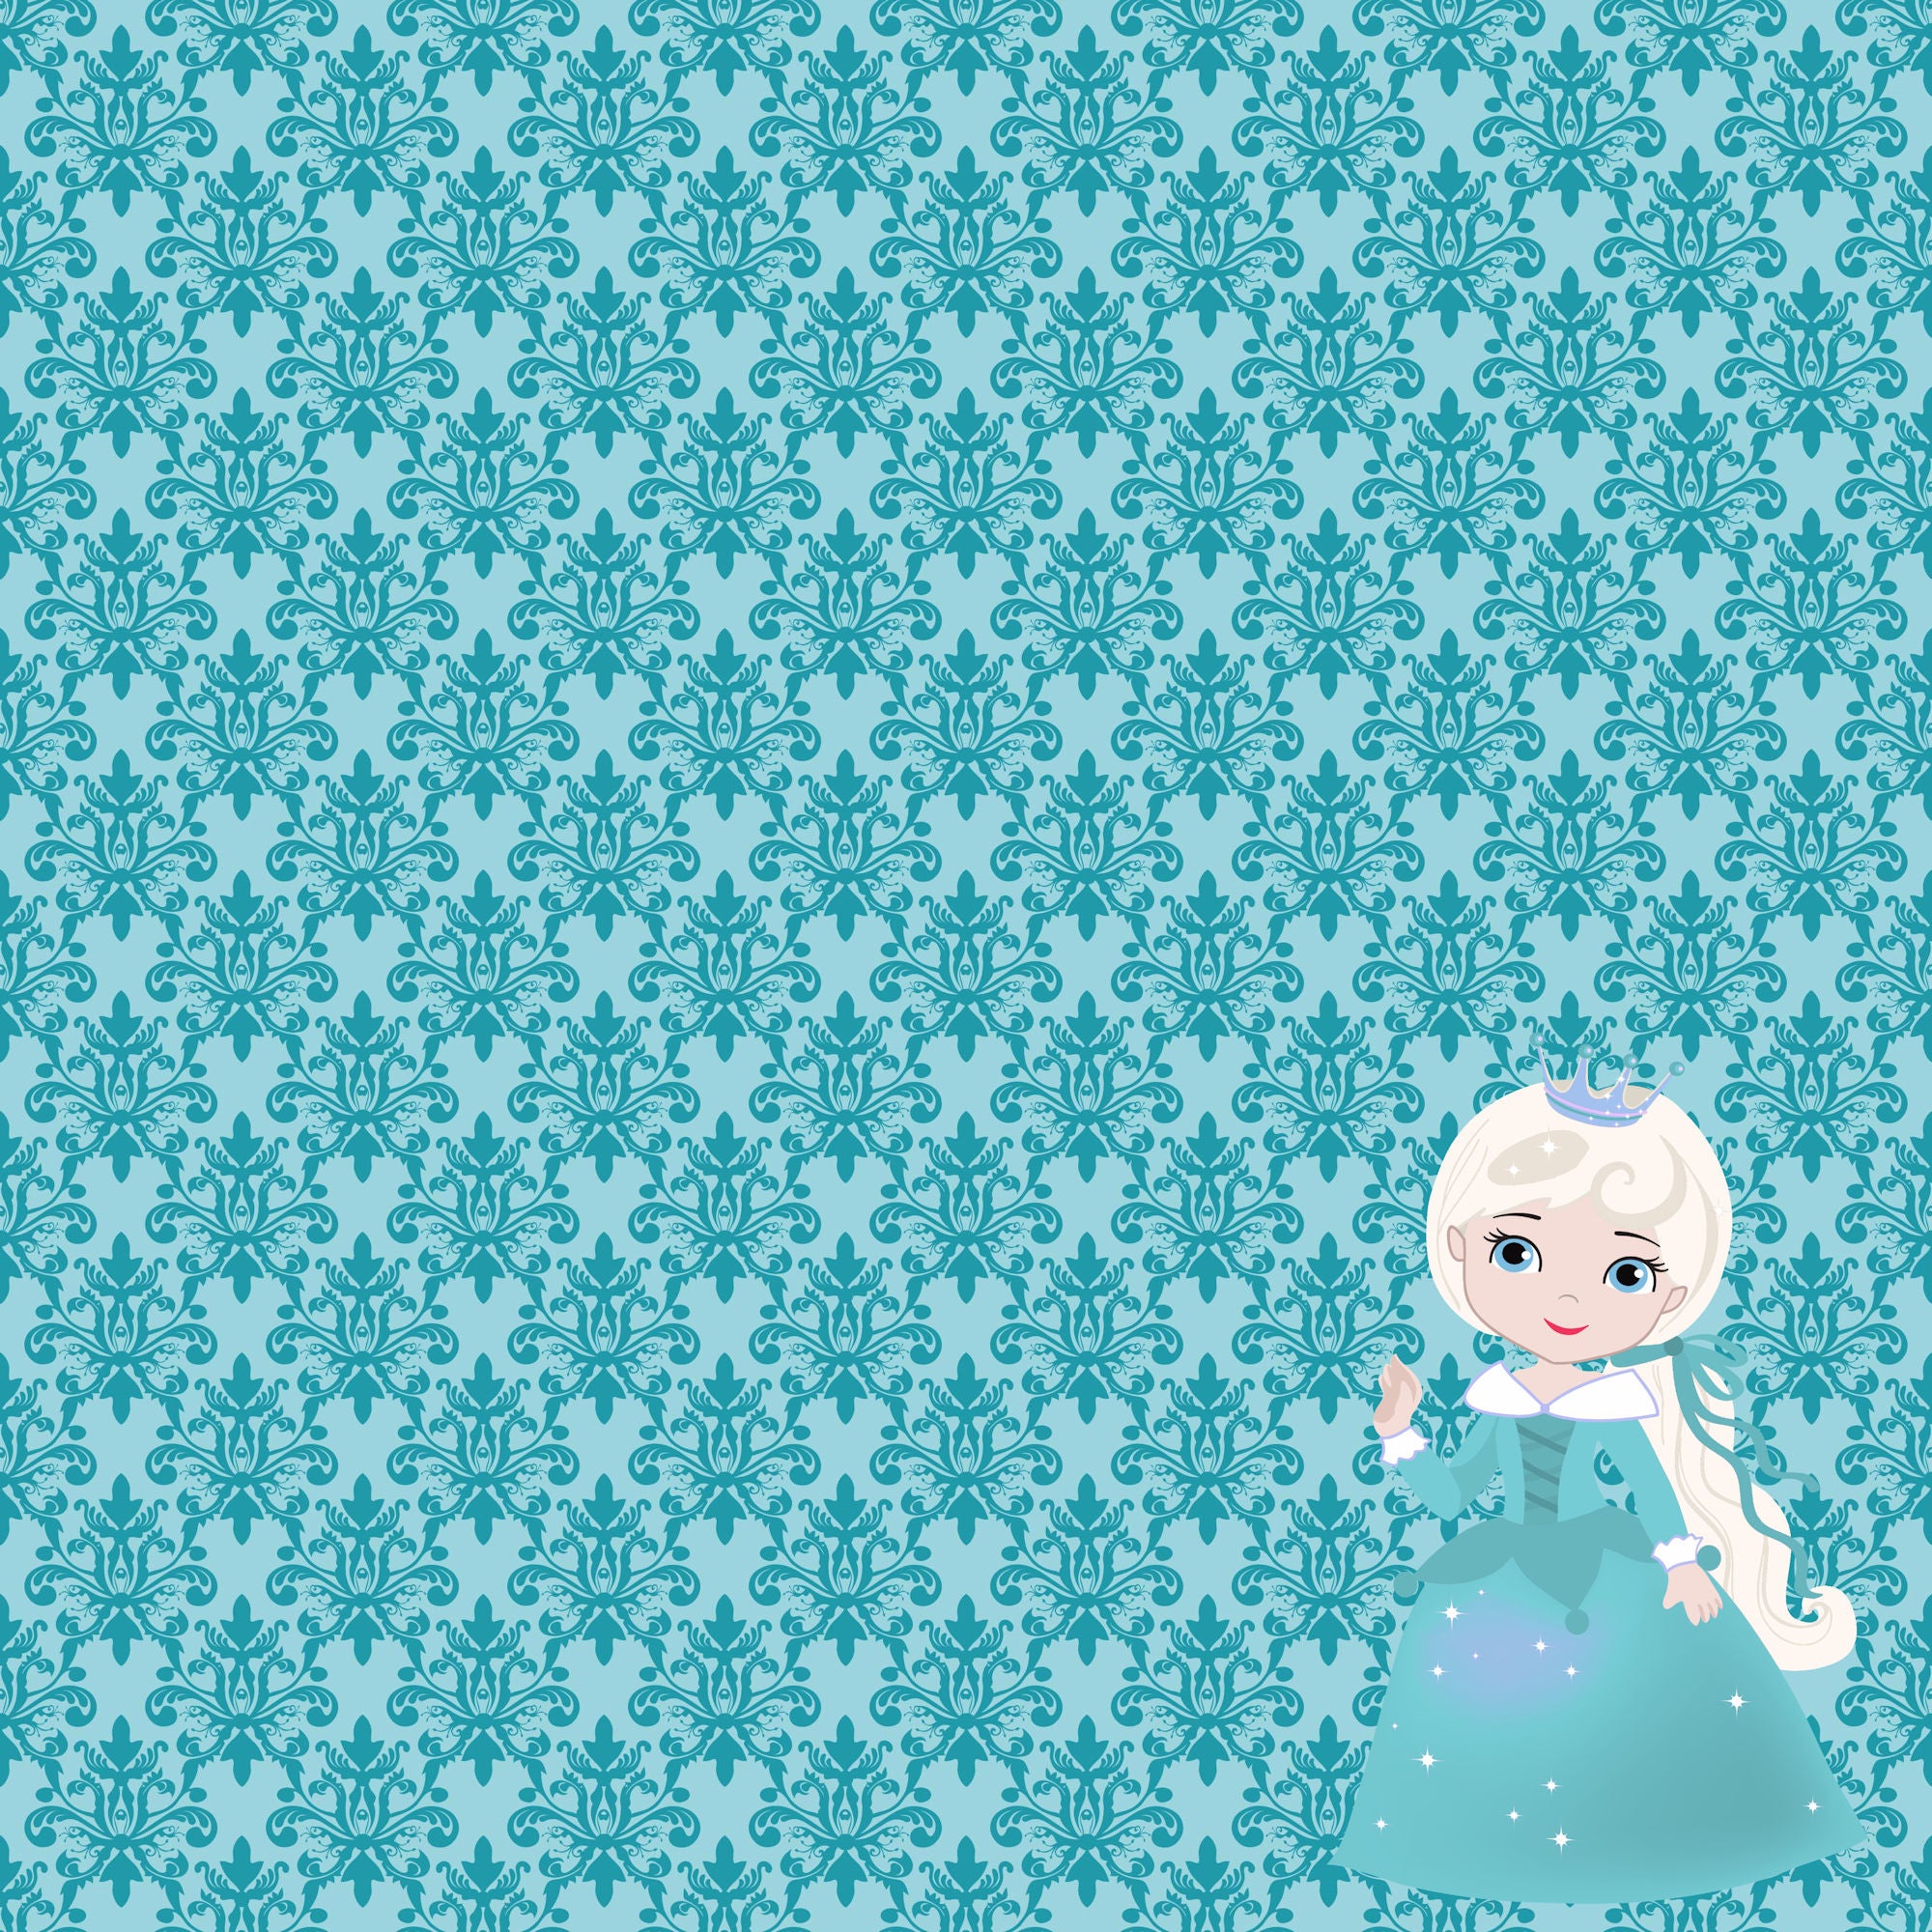 Inspired By Collection Winter Princess 12 x 12 Double-Sided Scrapbook Paper by SSC Designs